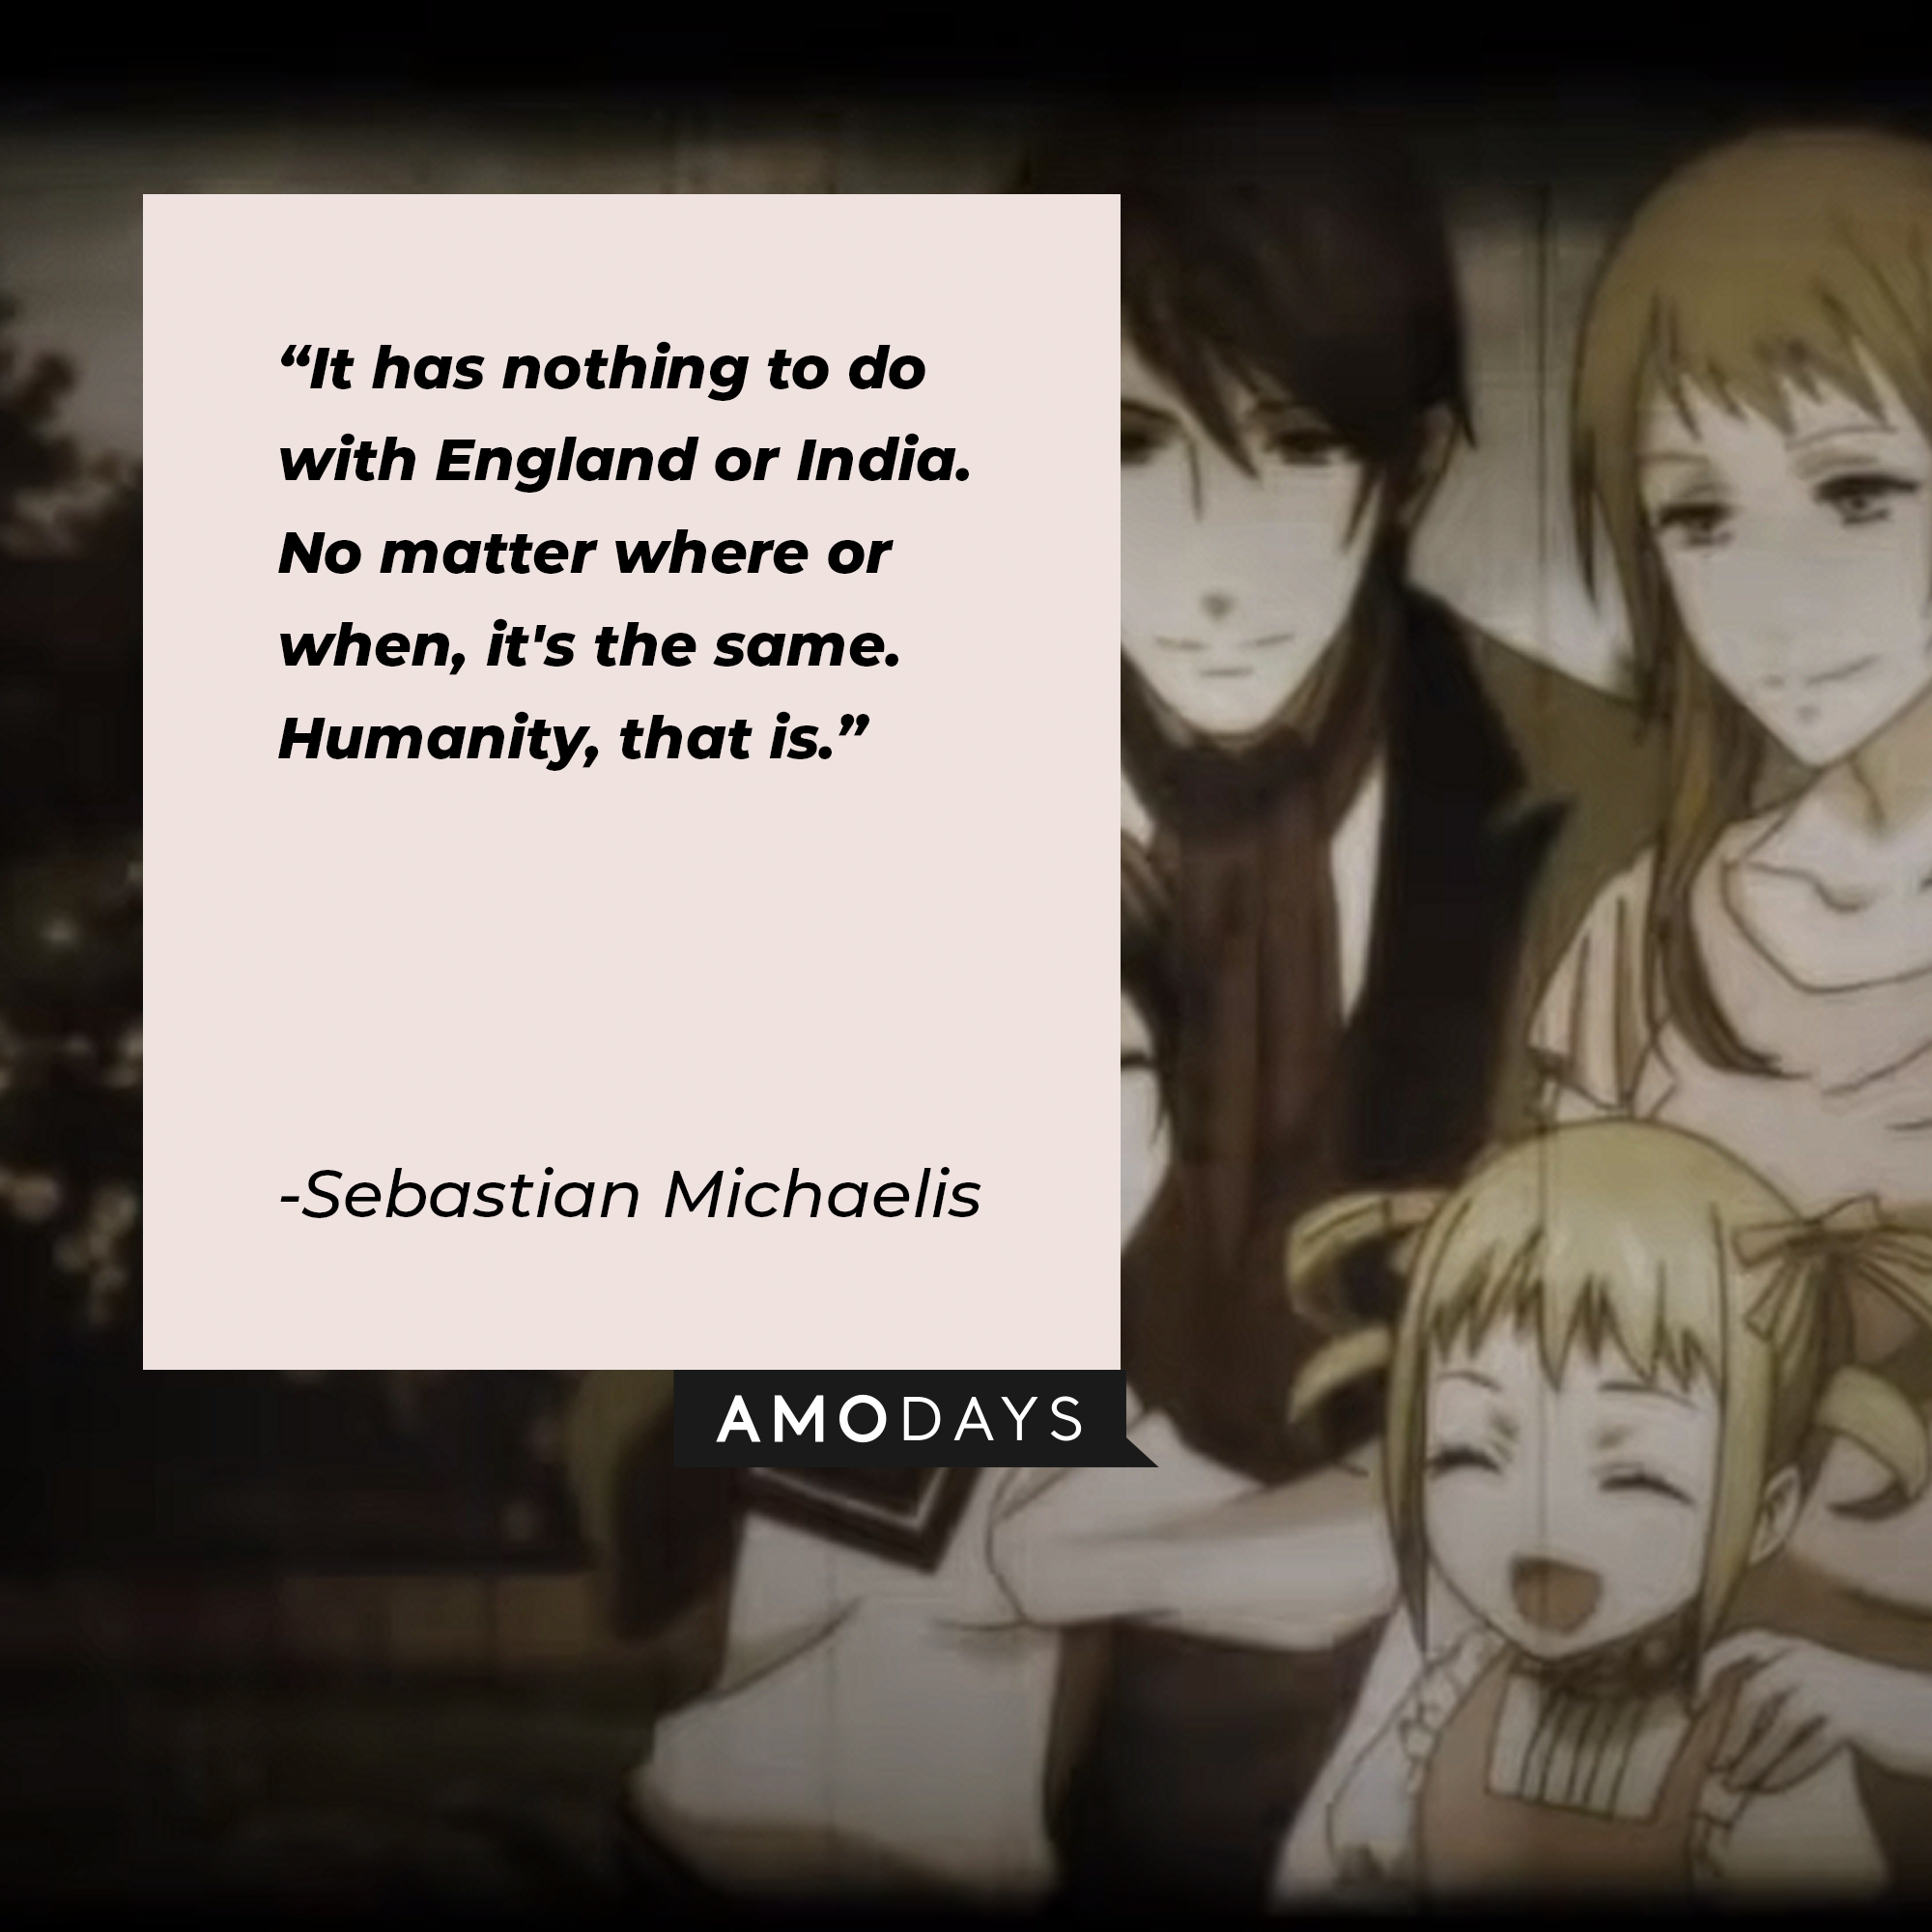 An image from "Black Butler" with Sebastian Michaelis' quote: "It has nothing to do with England or India. No matter where or when, it's the same. Humanity, that is." | Source: youtube.com/Crunchyroll Dubs